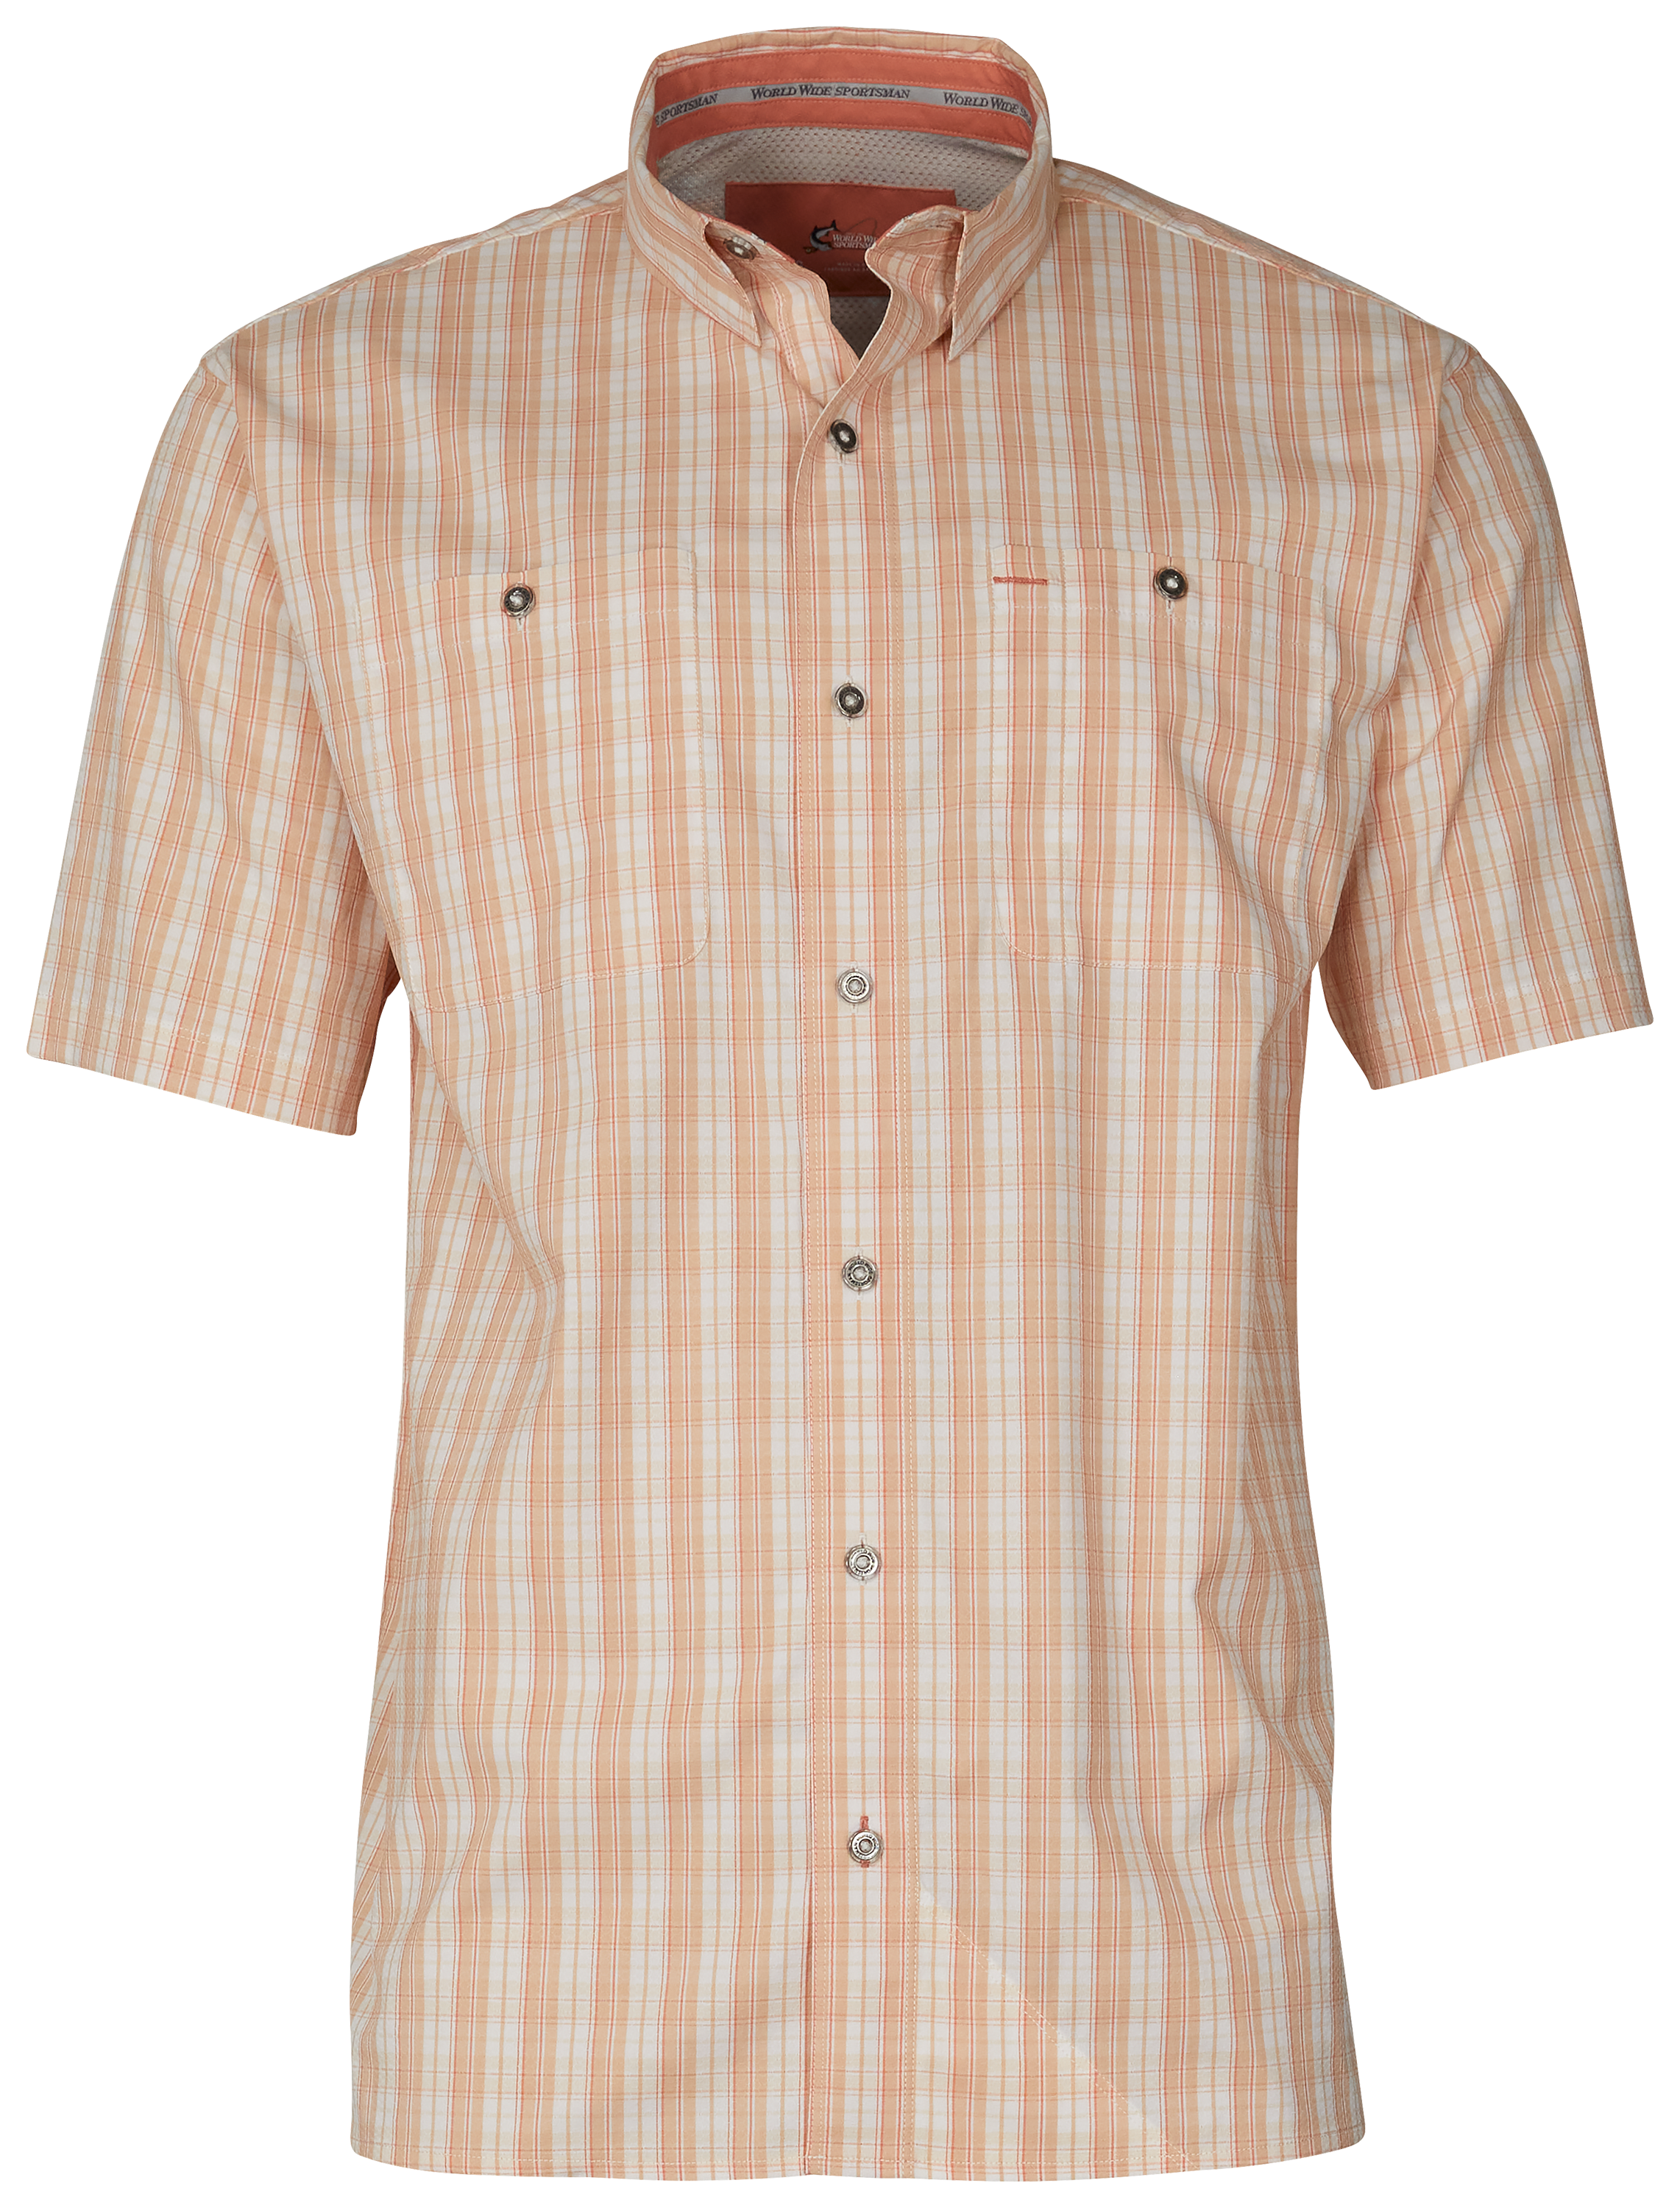 World Wide Sportsman Ultimate Angler Plaid Short-Sleeve Shirt for Men - Almost Apricot Plaid - 3XL